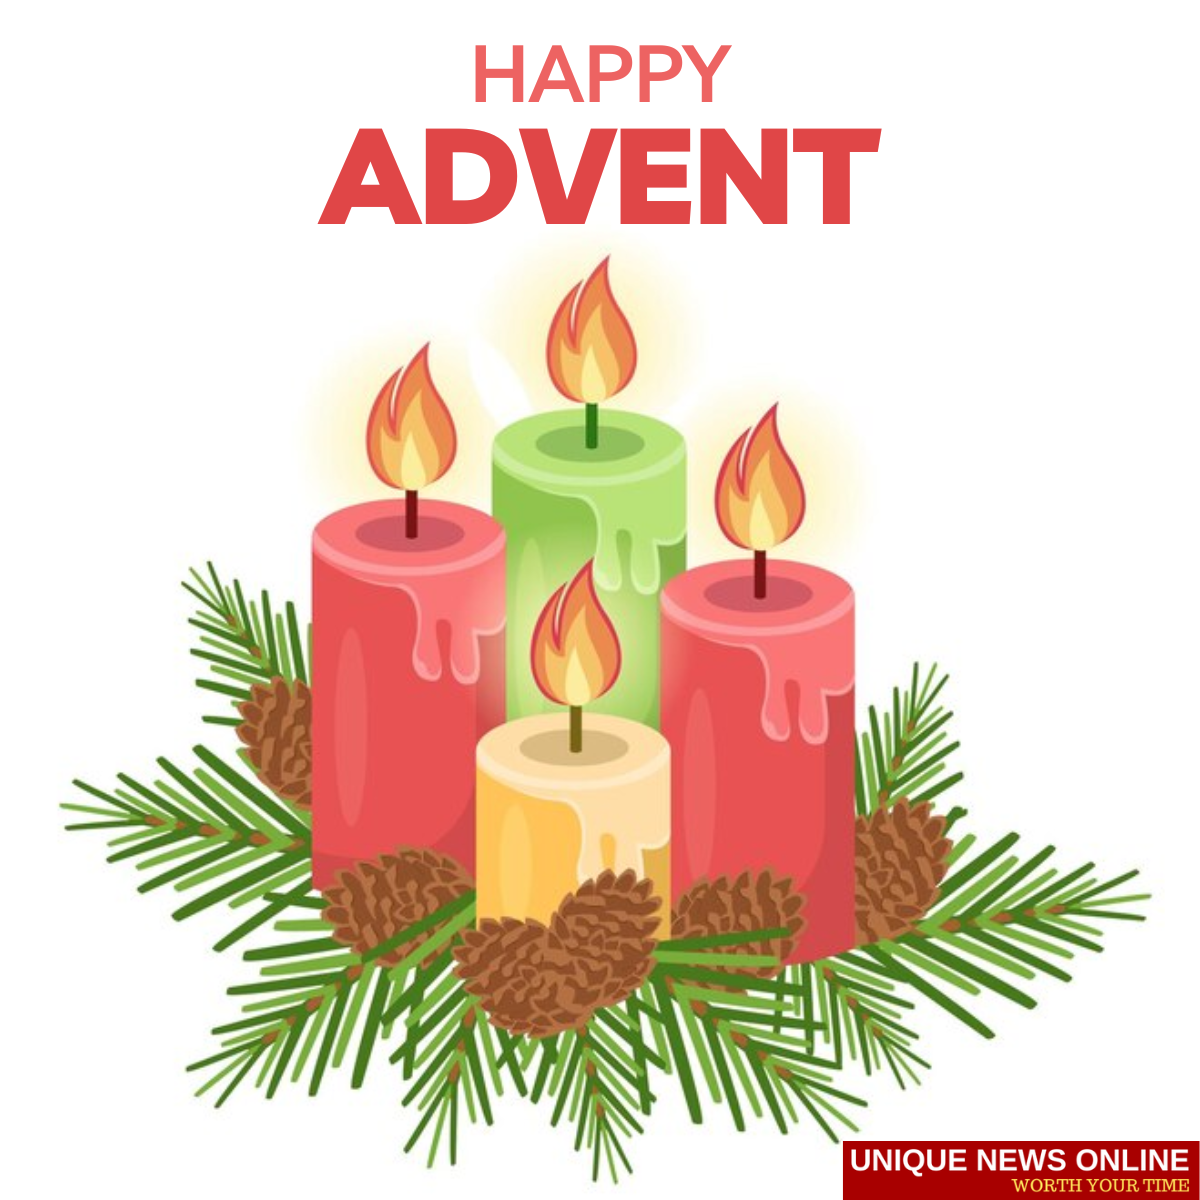 Happy Advent 2022: Best Wishes, HD Images, Quotes, Messages, Greetings, Posters, Sayings, and Cliparts to greet Friends and Family